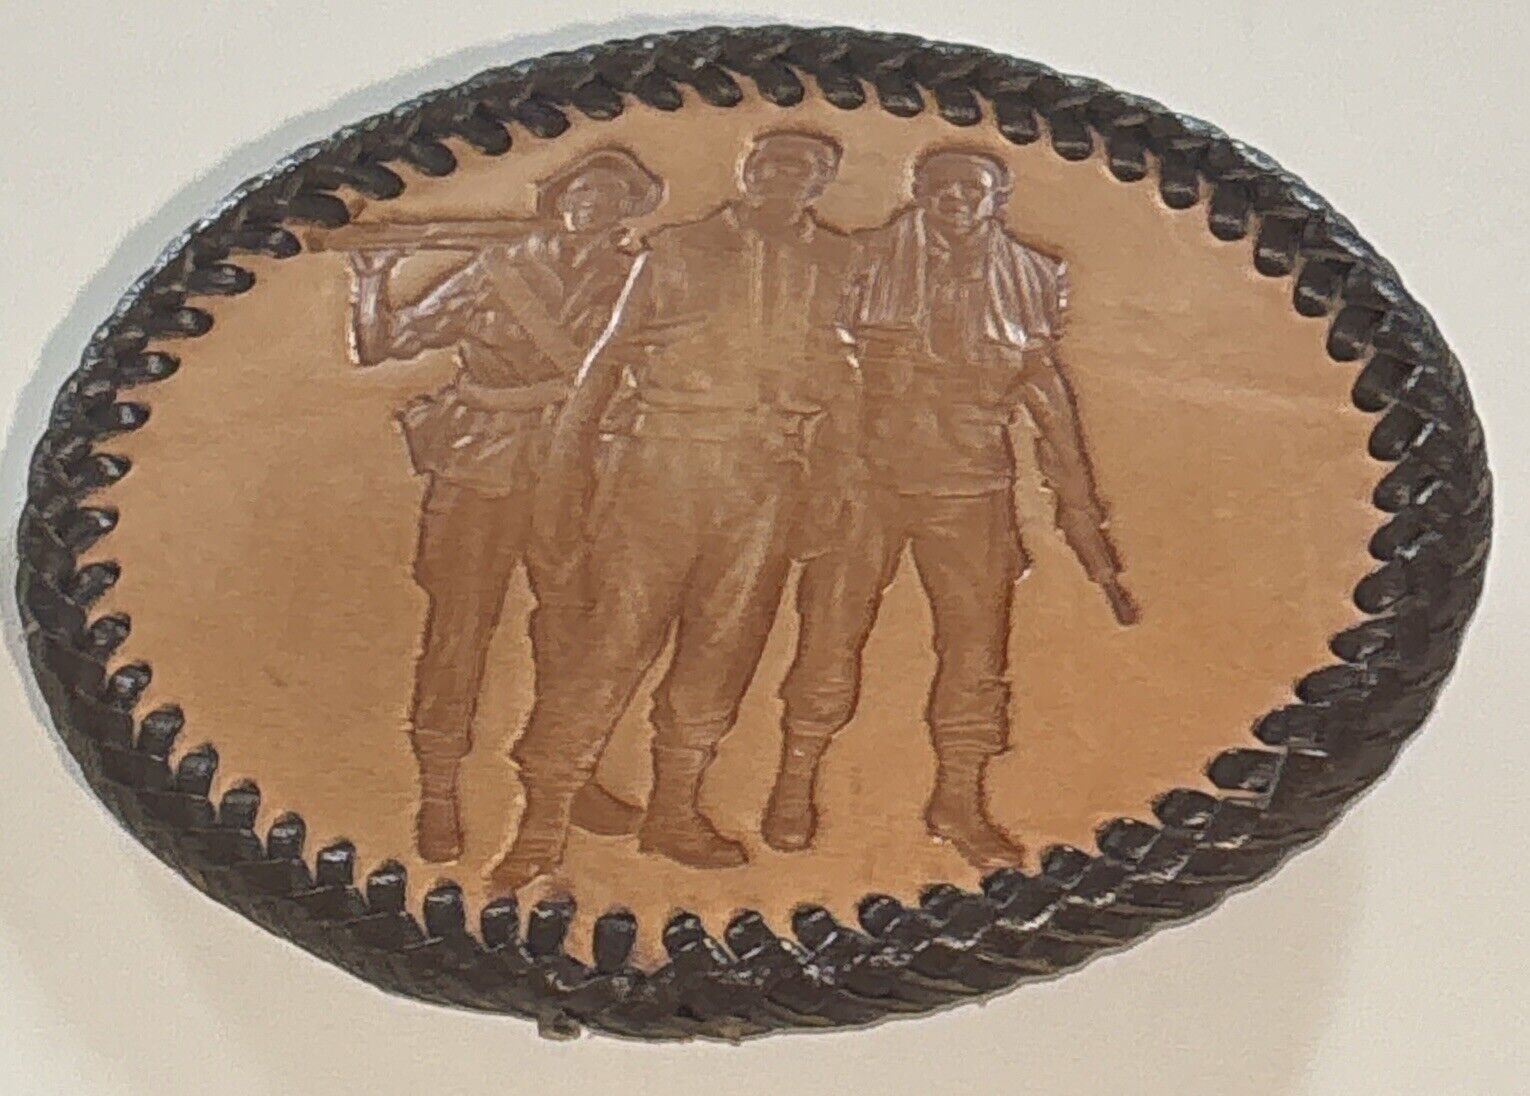 Lot (3) Vietnam? Military Soldiers Brown Oval Leather Braided Belt Buckle